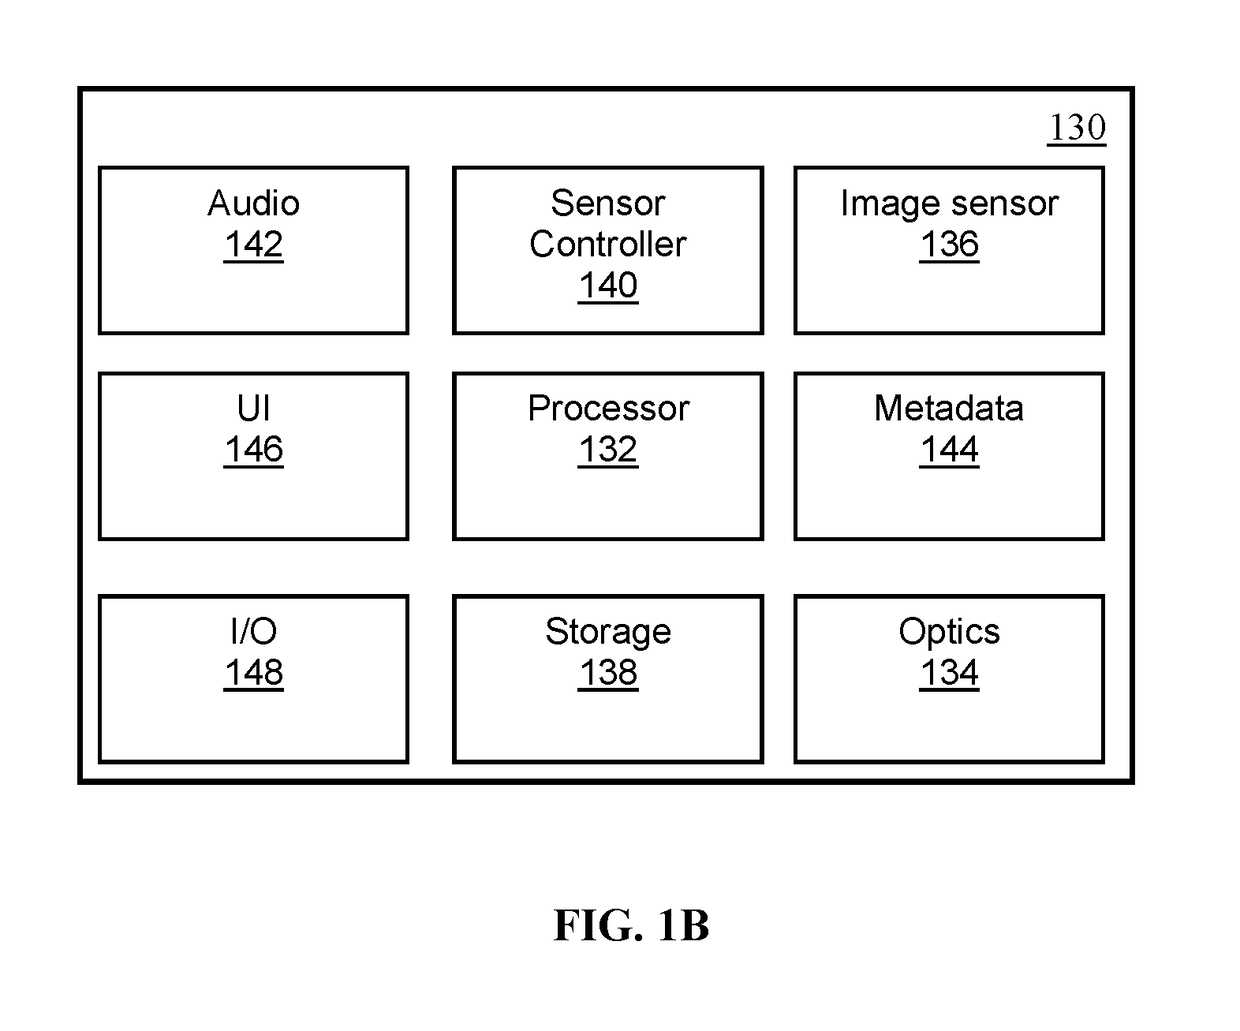 Apparatus and methods for video compression using multi-resolution scalable coding